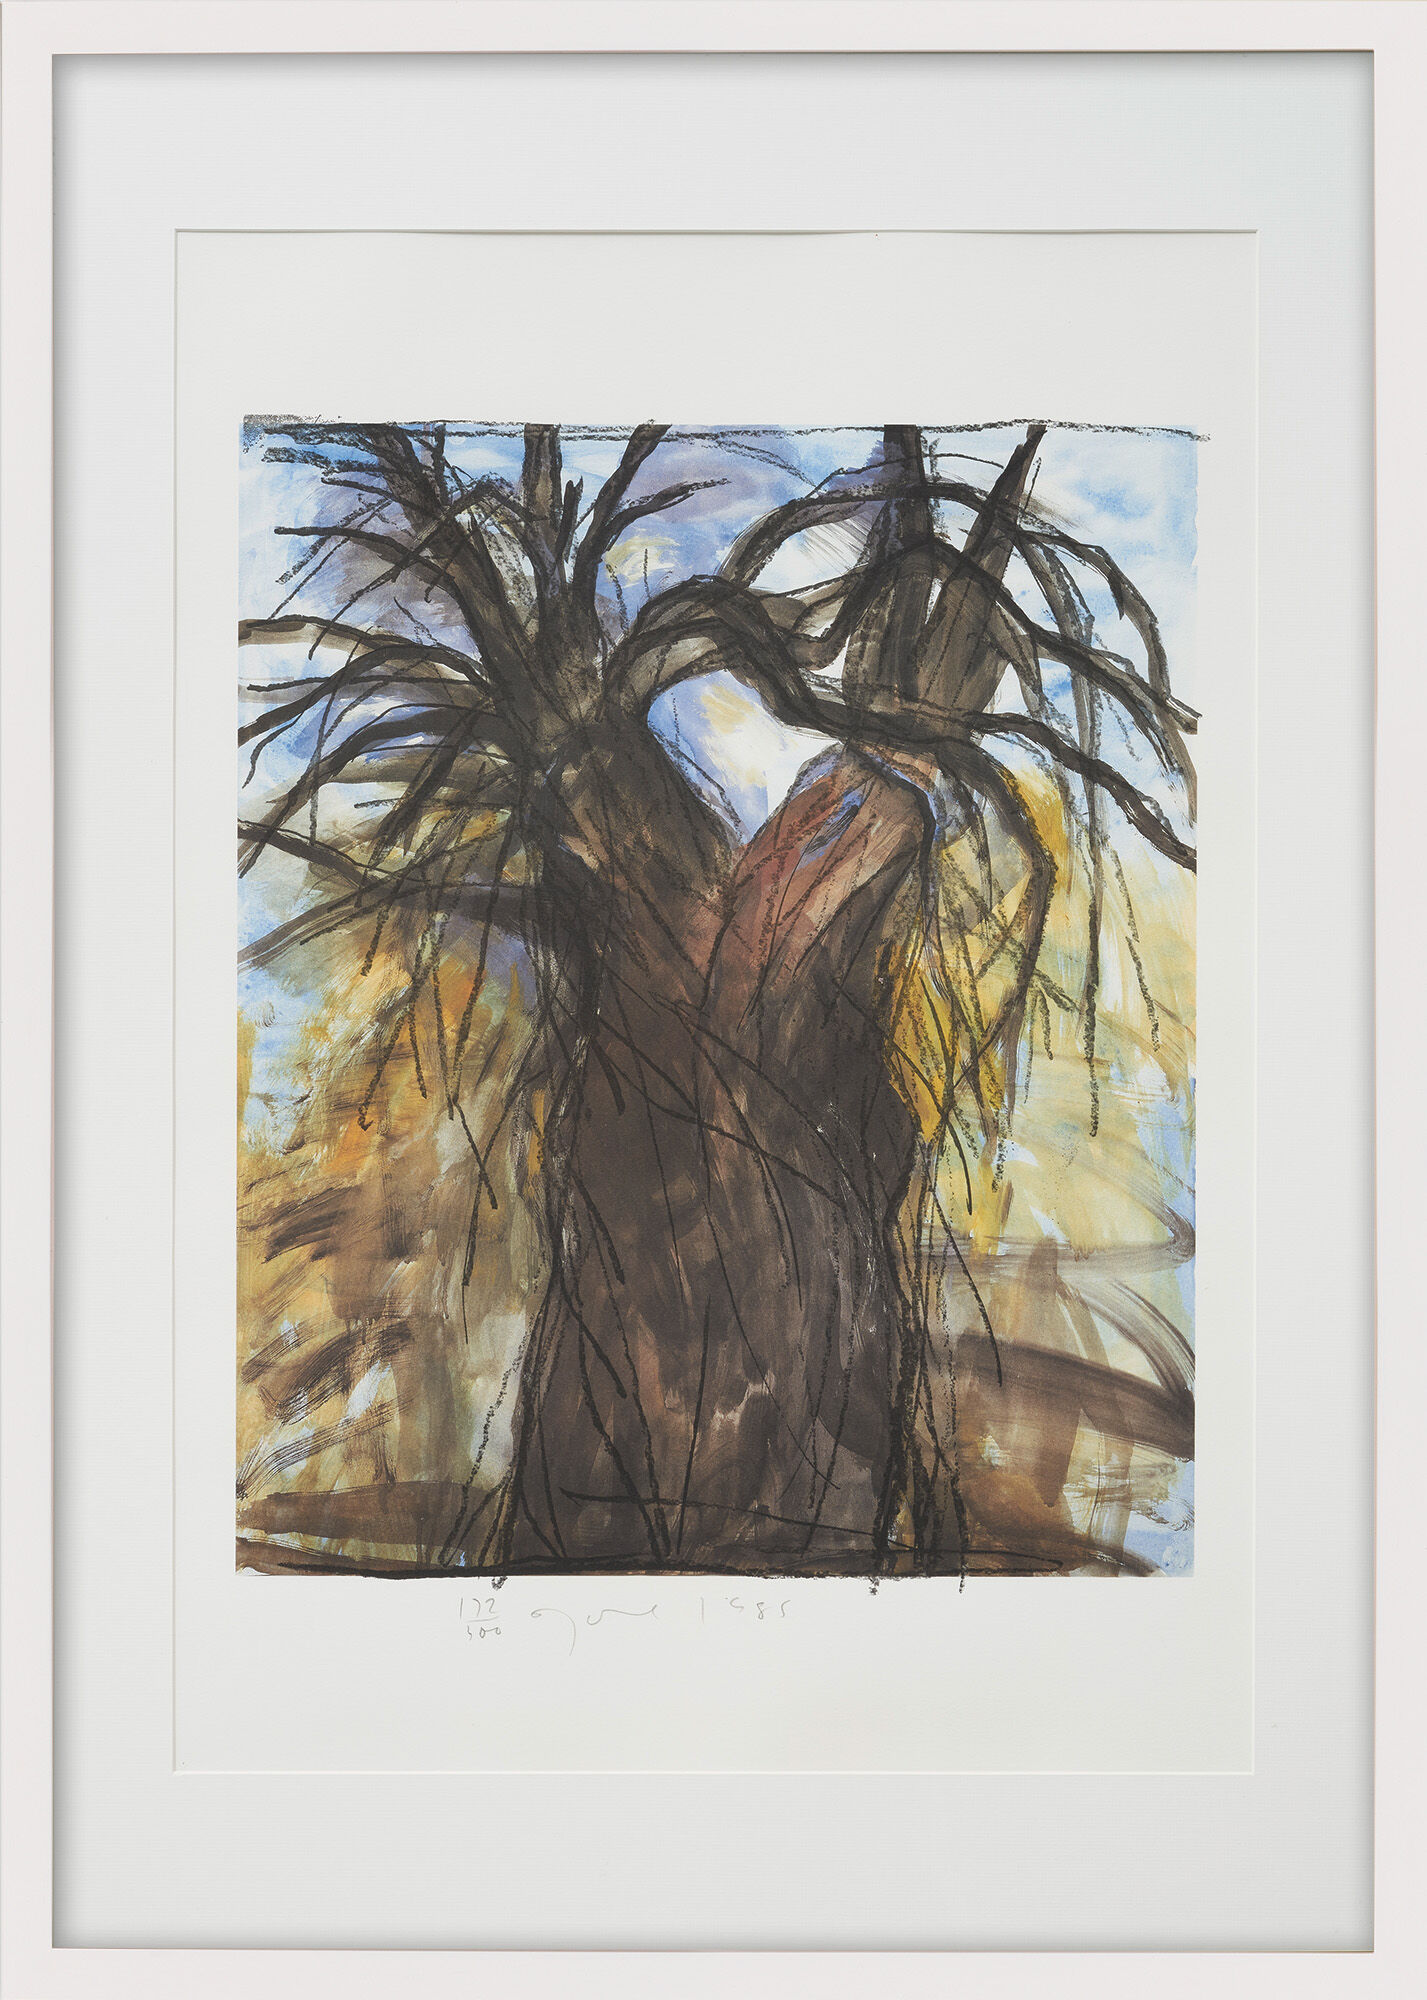 Picture "The New Year's Tree" (1985) by Jim Dine